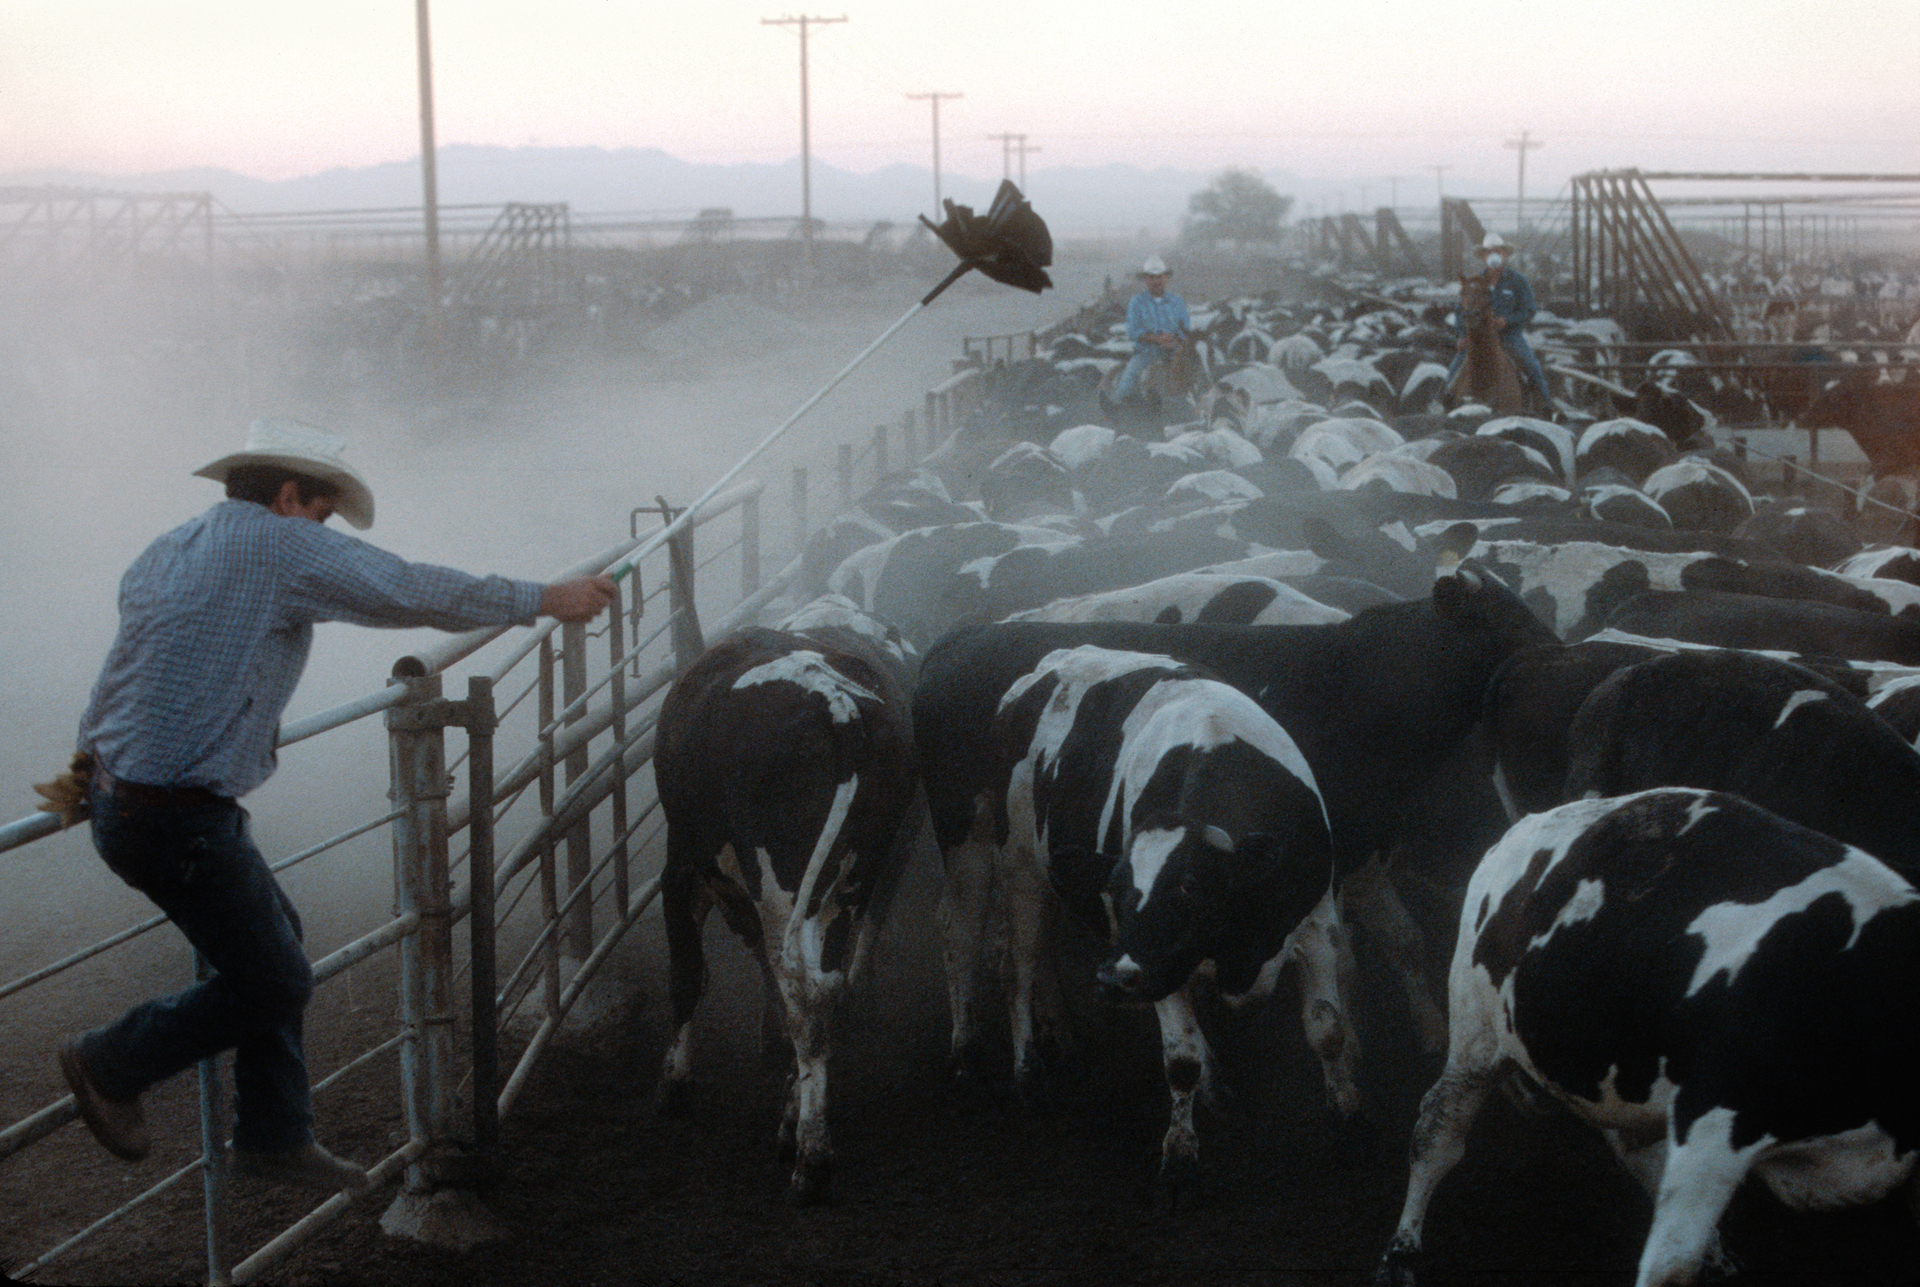  Breeding cattle is the primary source of revenue in the Imperial Valley and Bill Brandt’s cattle ranch is the area’s largest, with a feed yard of 85,000 head.  Brawley  